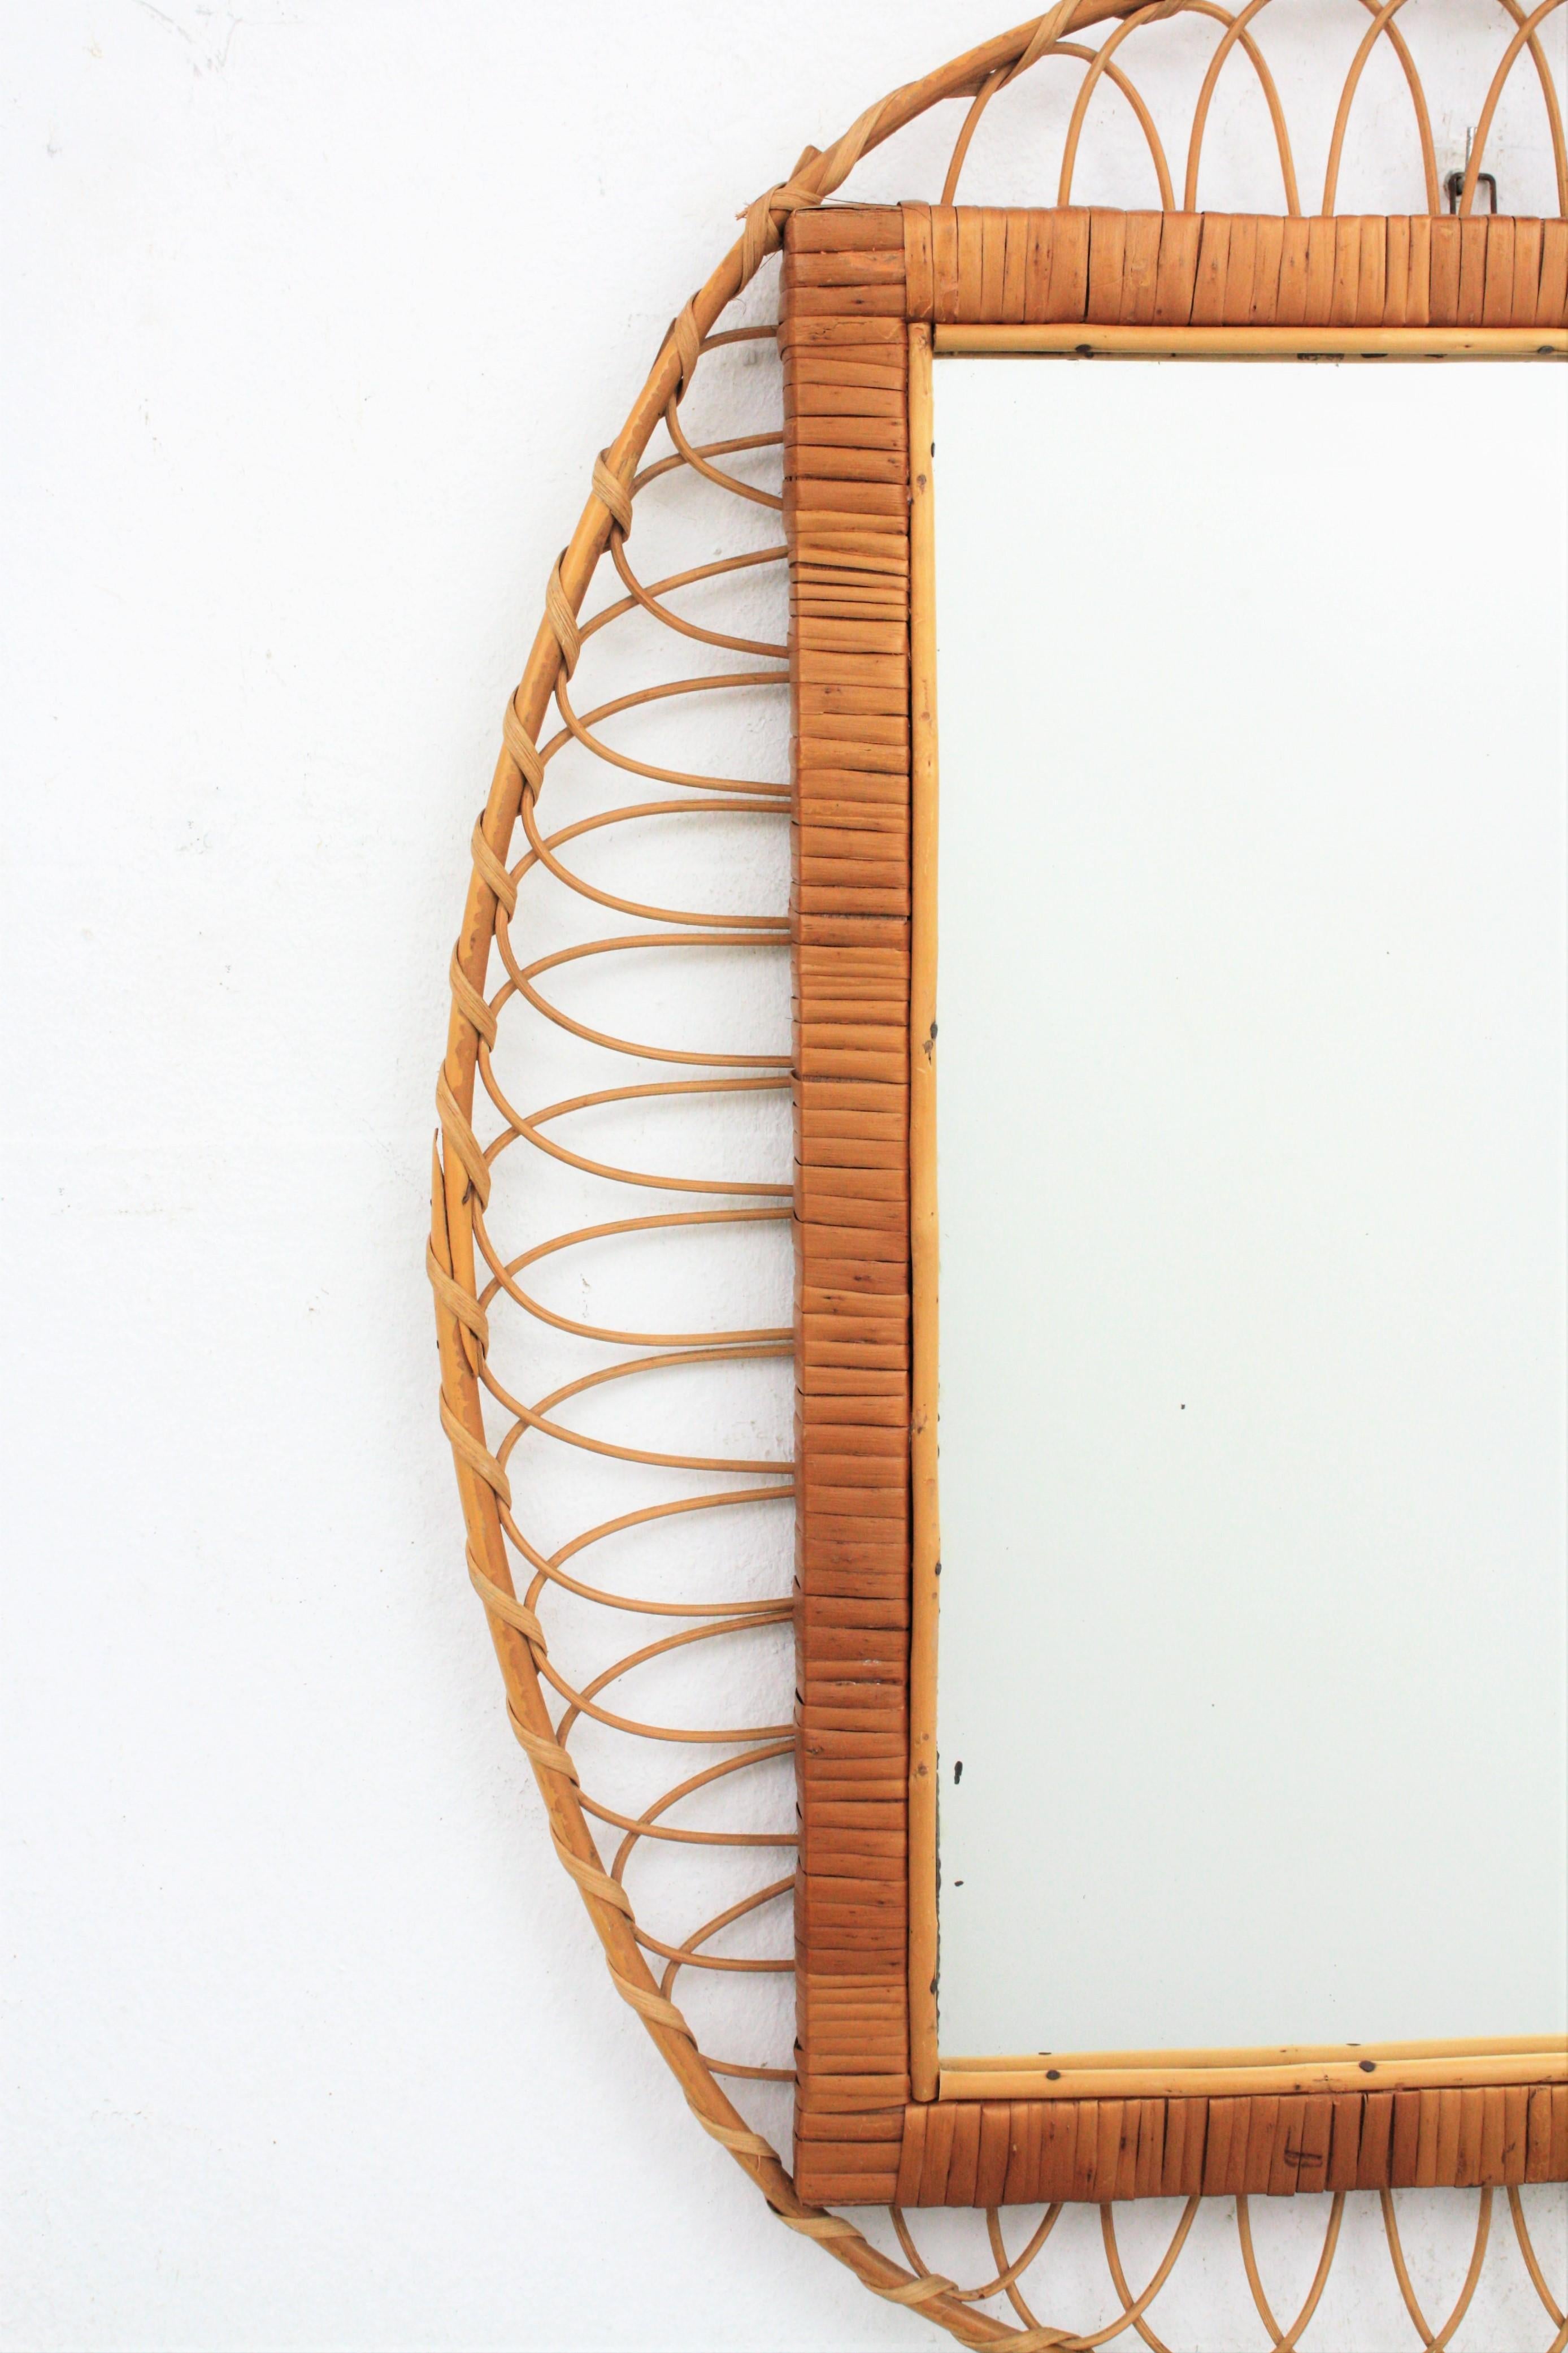 Wicker French Rattan Oval Mirror with Woven Rectangular Frame, 1960s For Sale